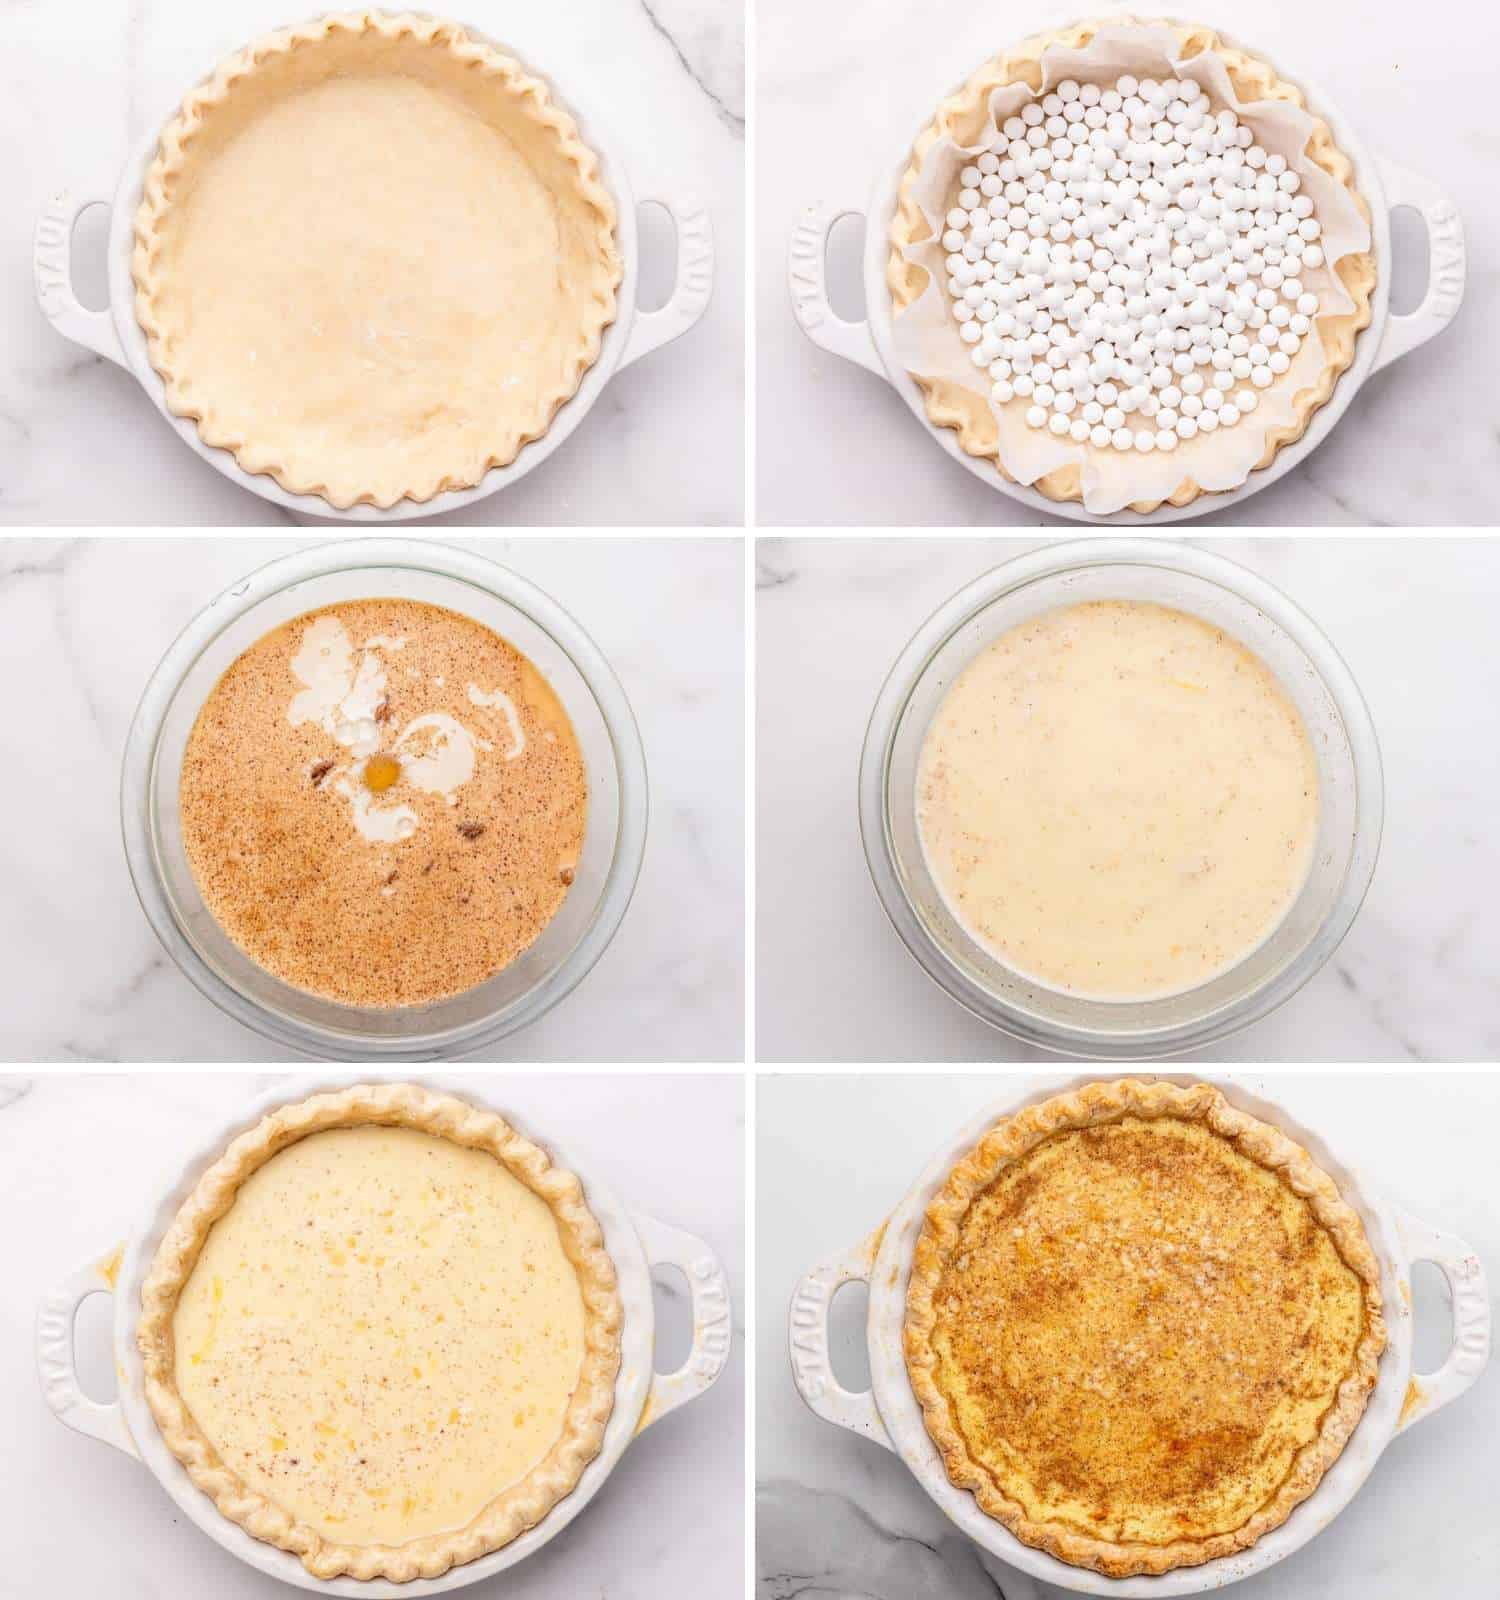 A collage of six images showing the stages of making an egg custard pie